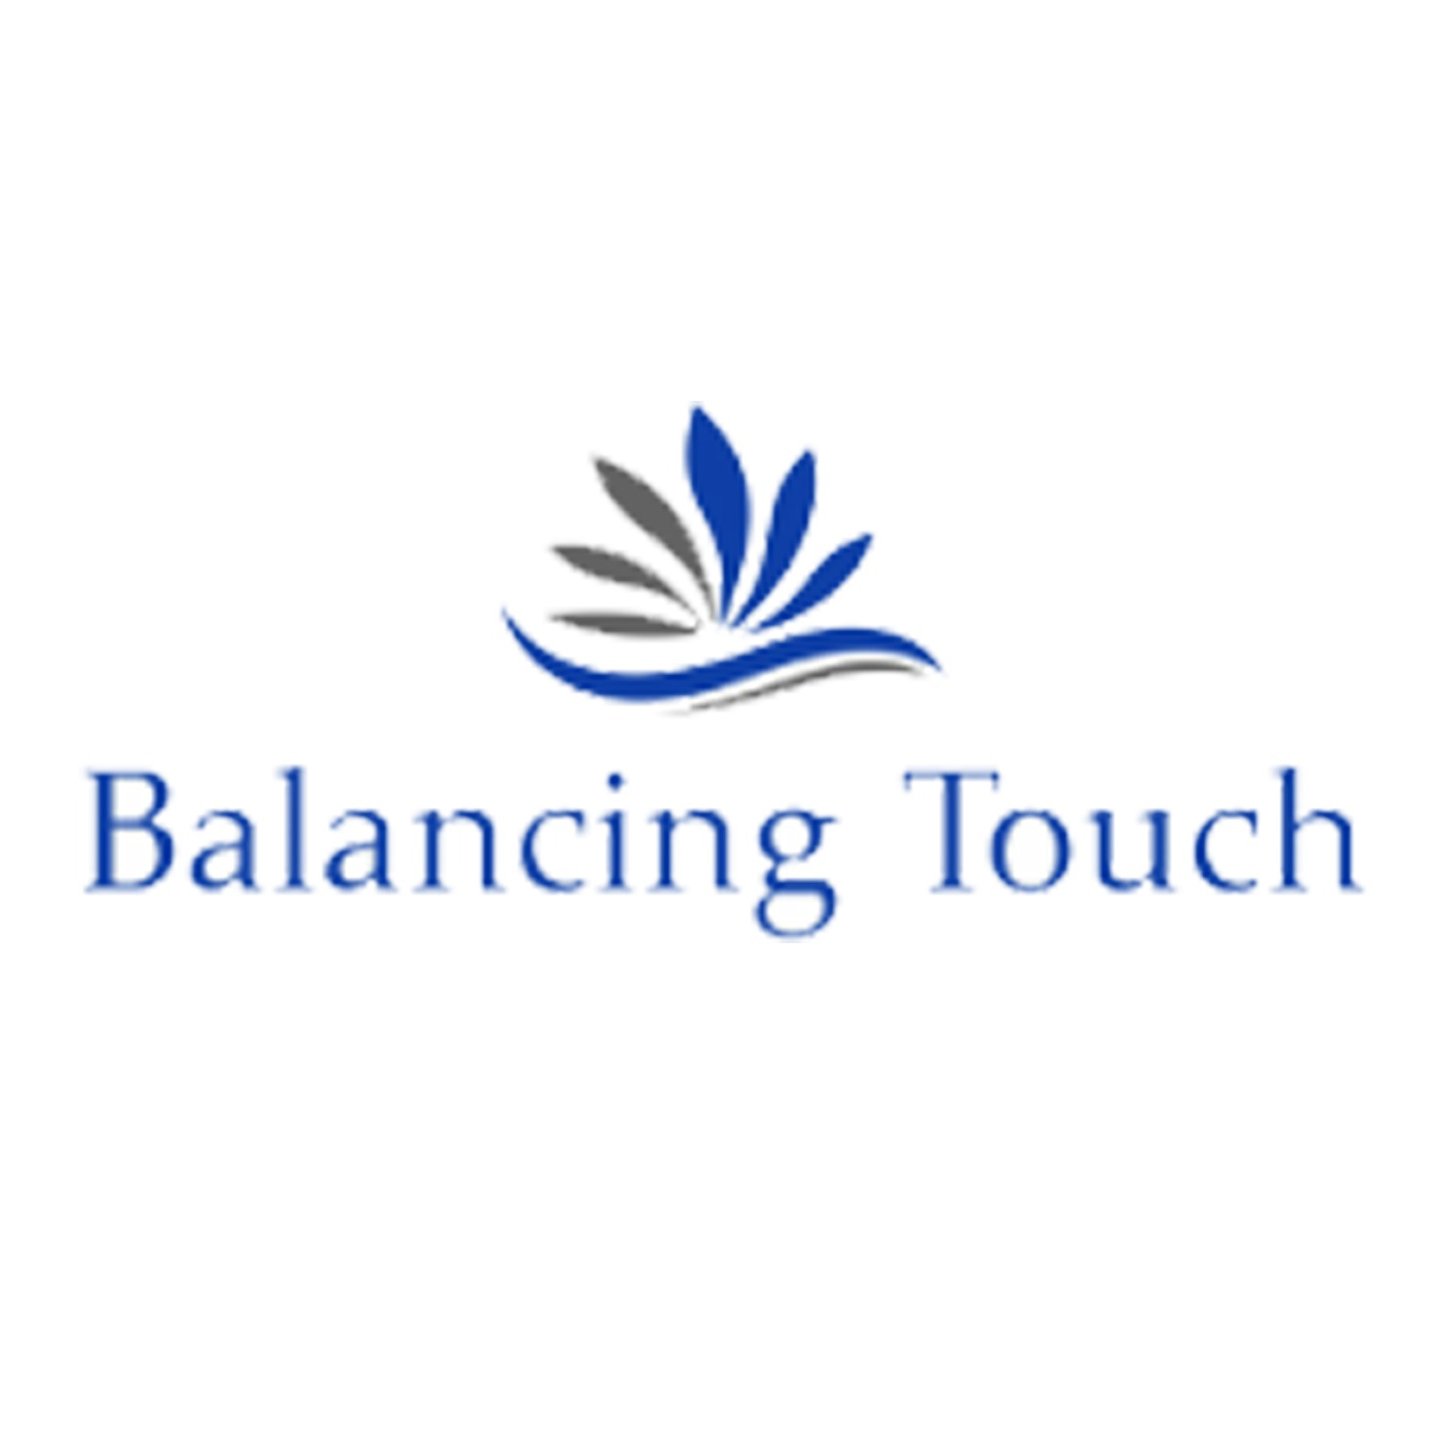 Balancing touch